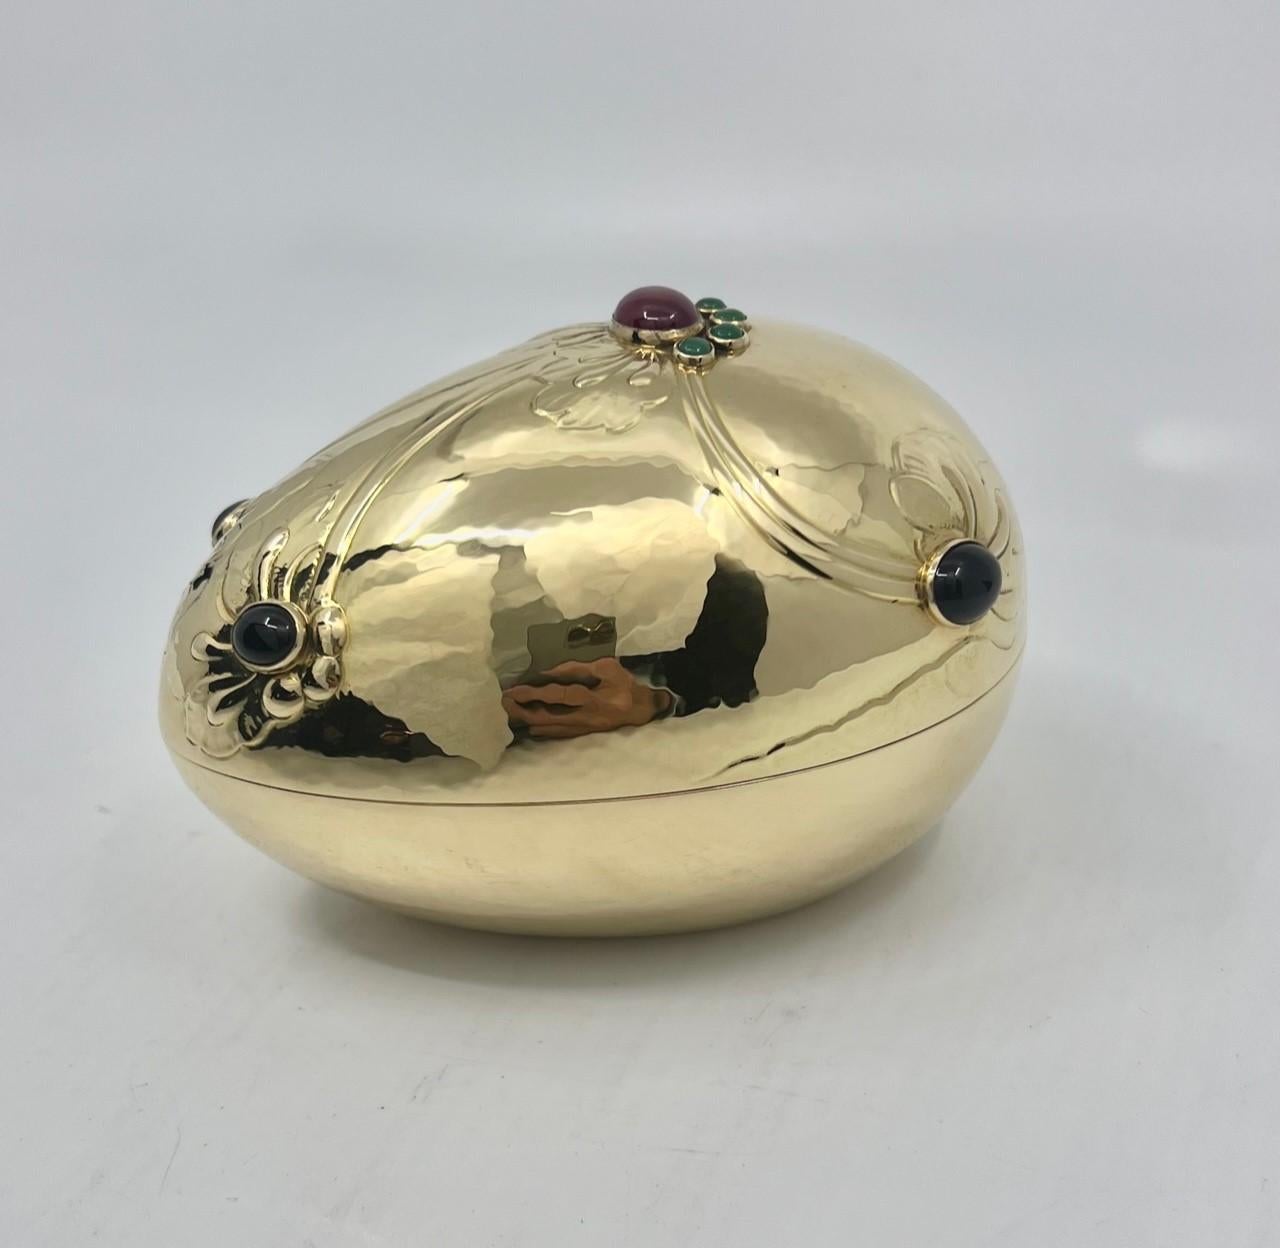 The rare 18kt gold Georg Jensen bonbonnière is an exquisite piece of hollowware/jewelry designed to adorn the home with elegance and charm. This bonbonnière is a testament to the meticulous craftsmanship of Georg Jensen, a renowned silversmith from